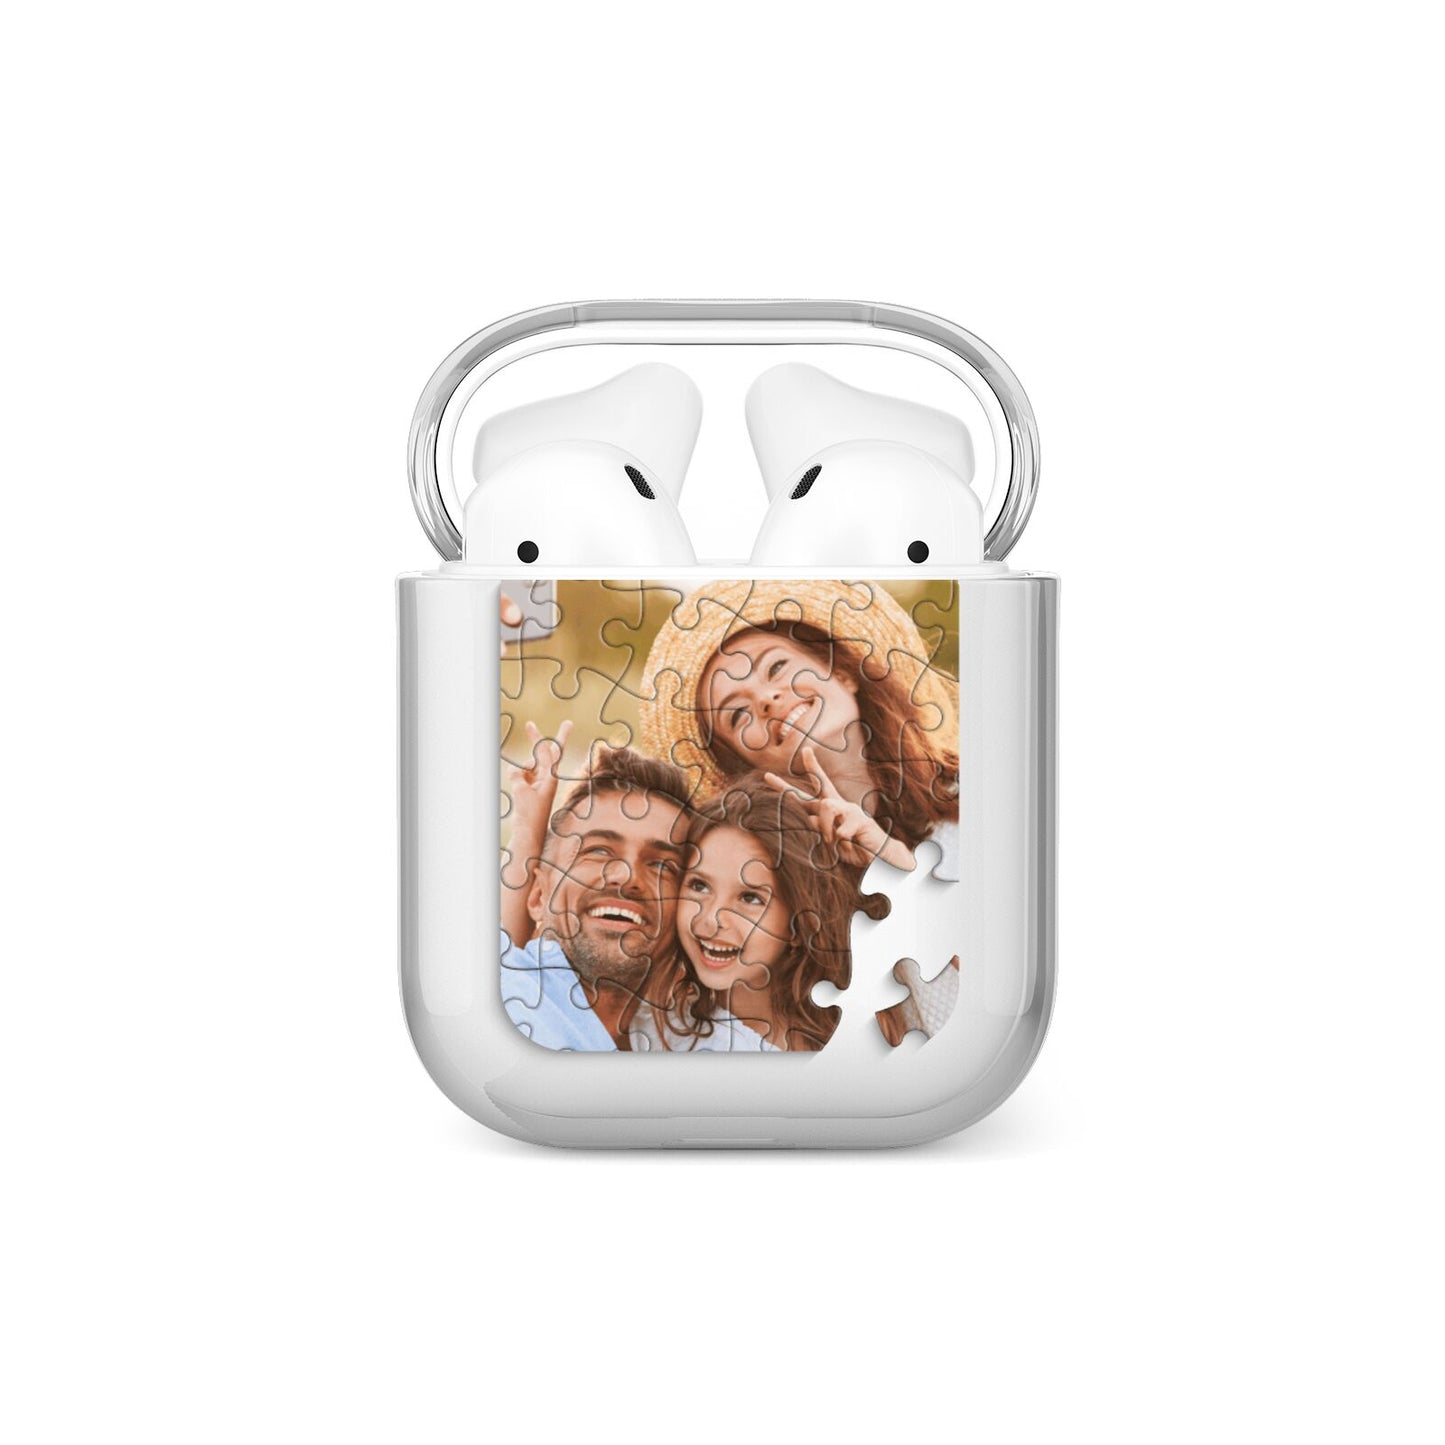 Personalised Photo Upload Puzzle Effect AirPods Case